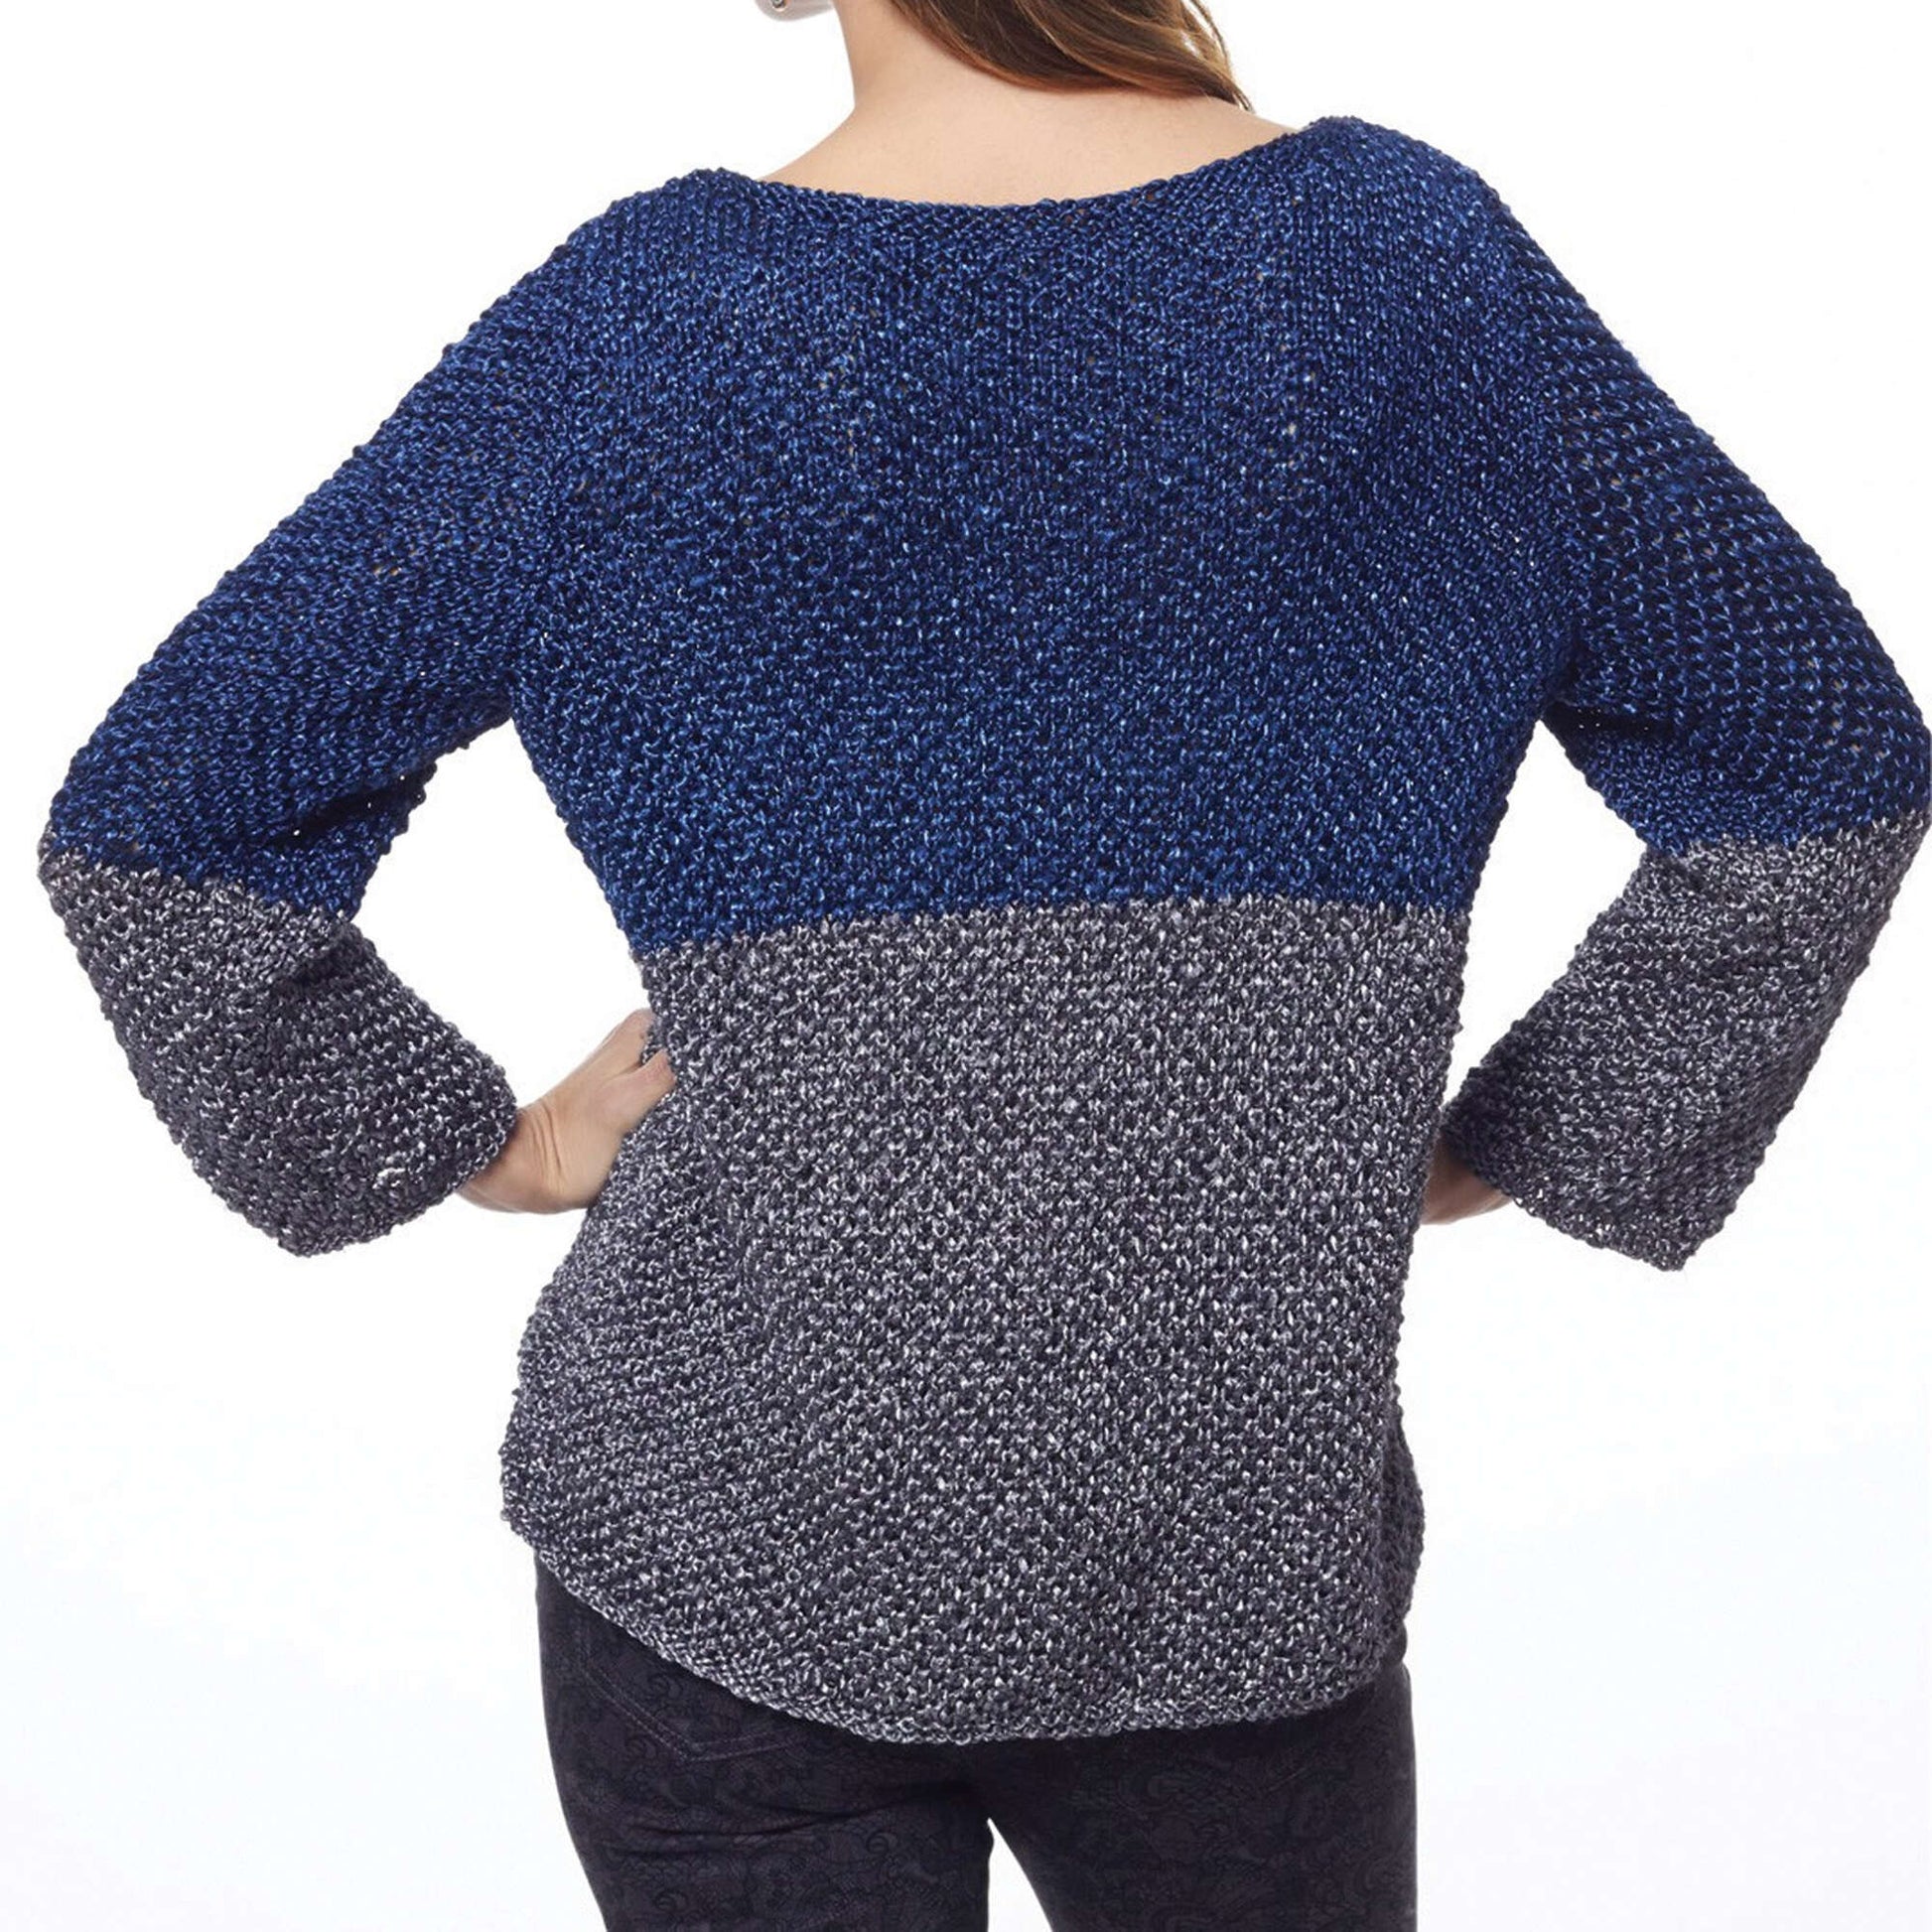 Free Patons Knit Color Dipped Top Pattern